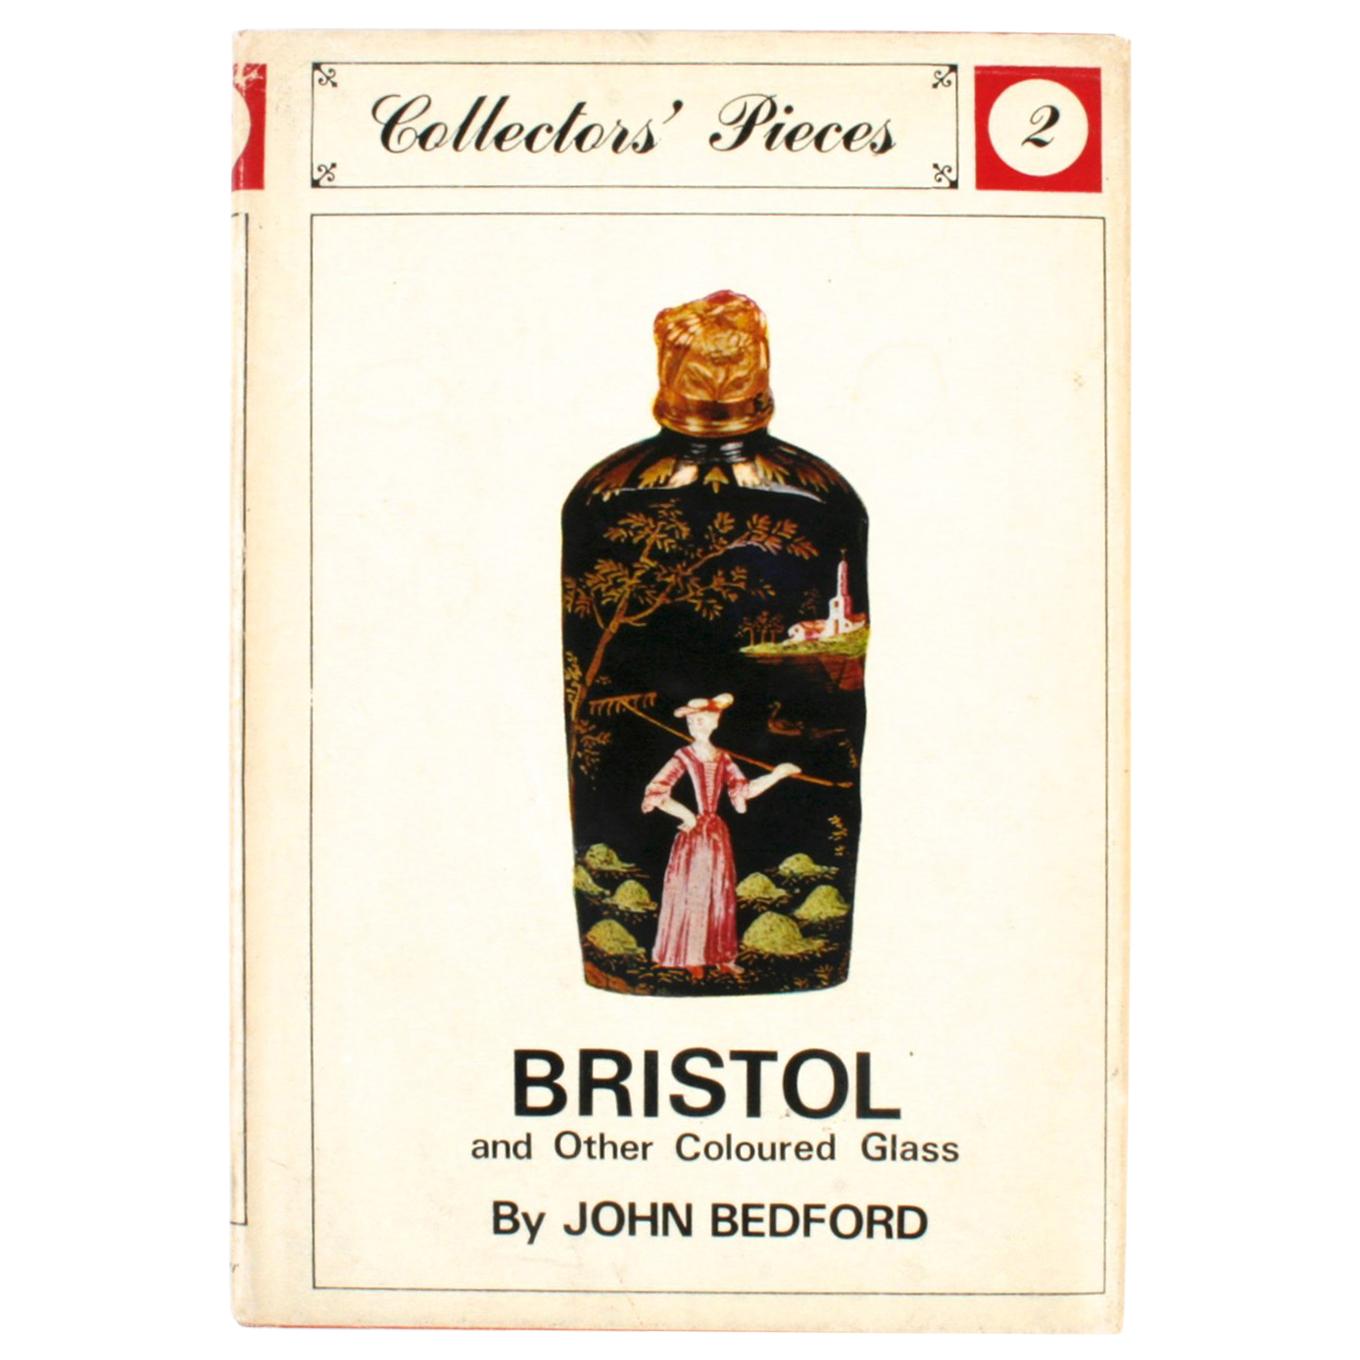 Bristol and Other Coloured Glass by John Bedford